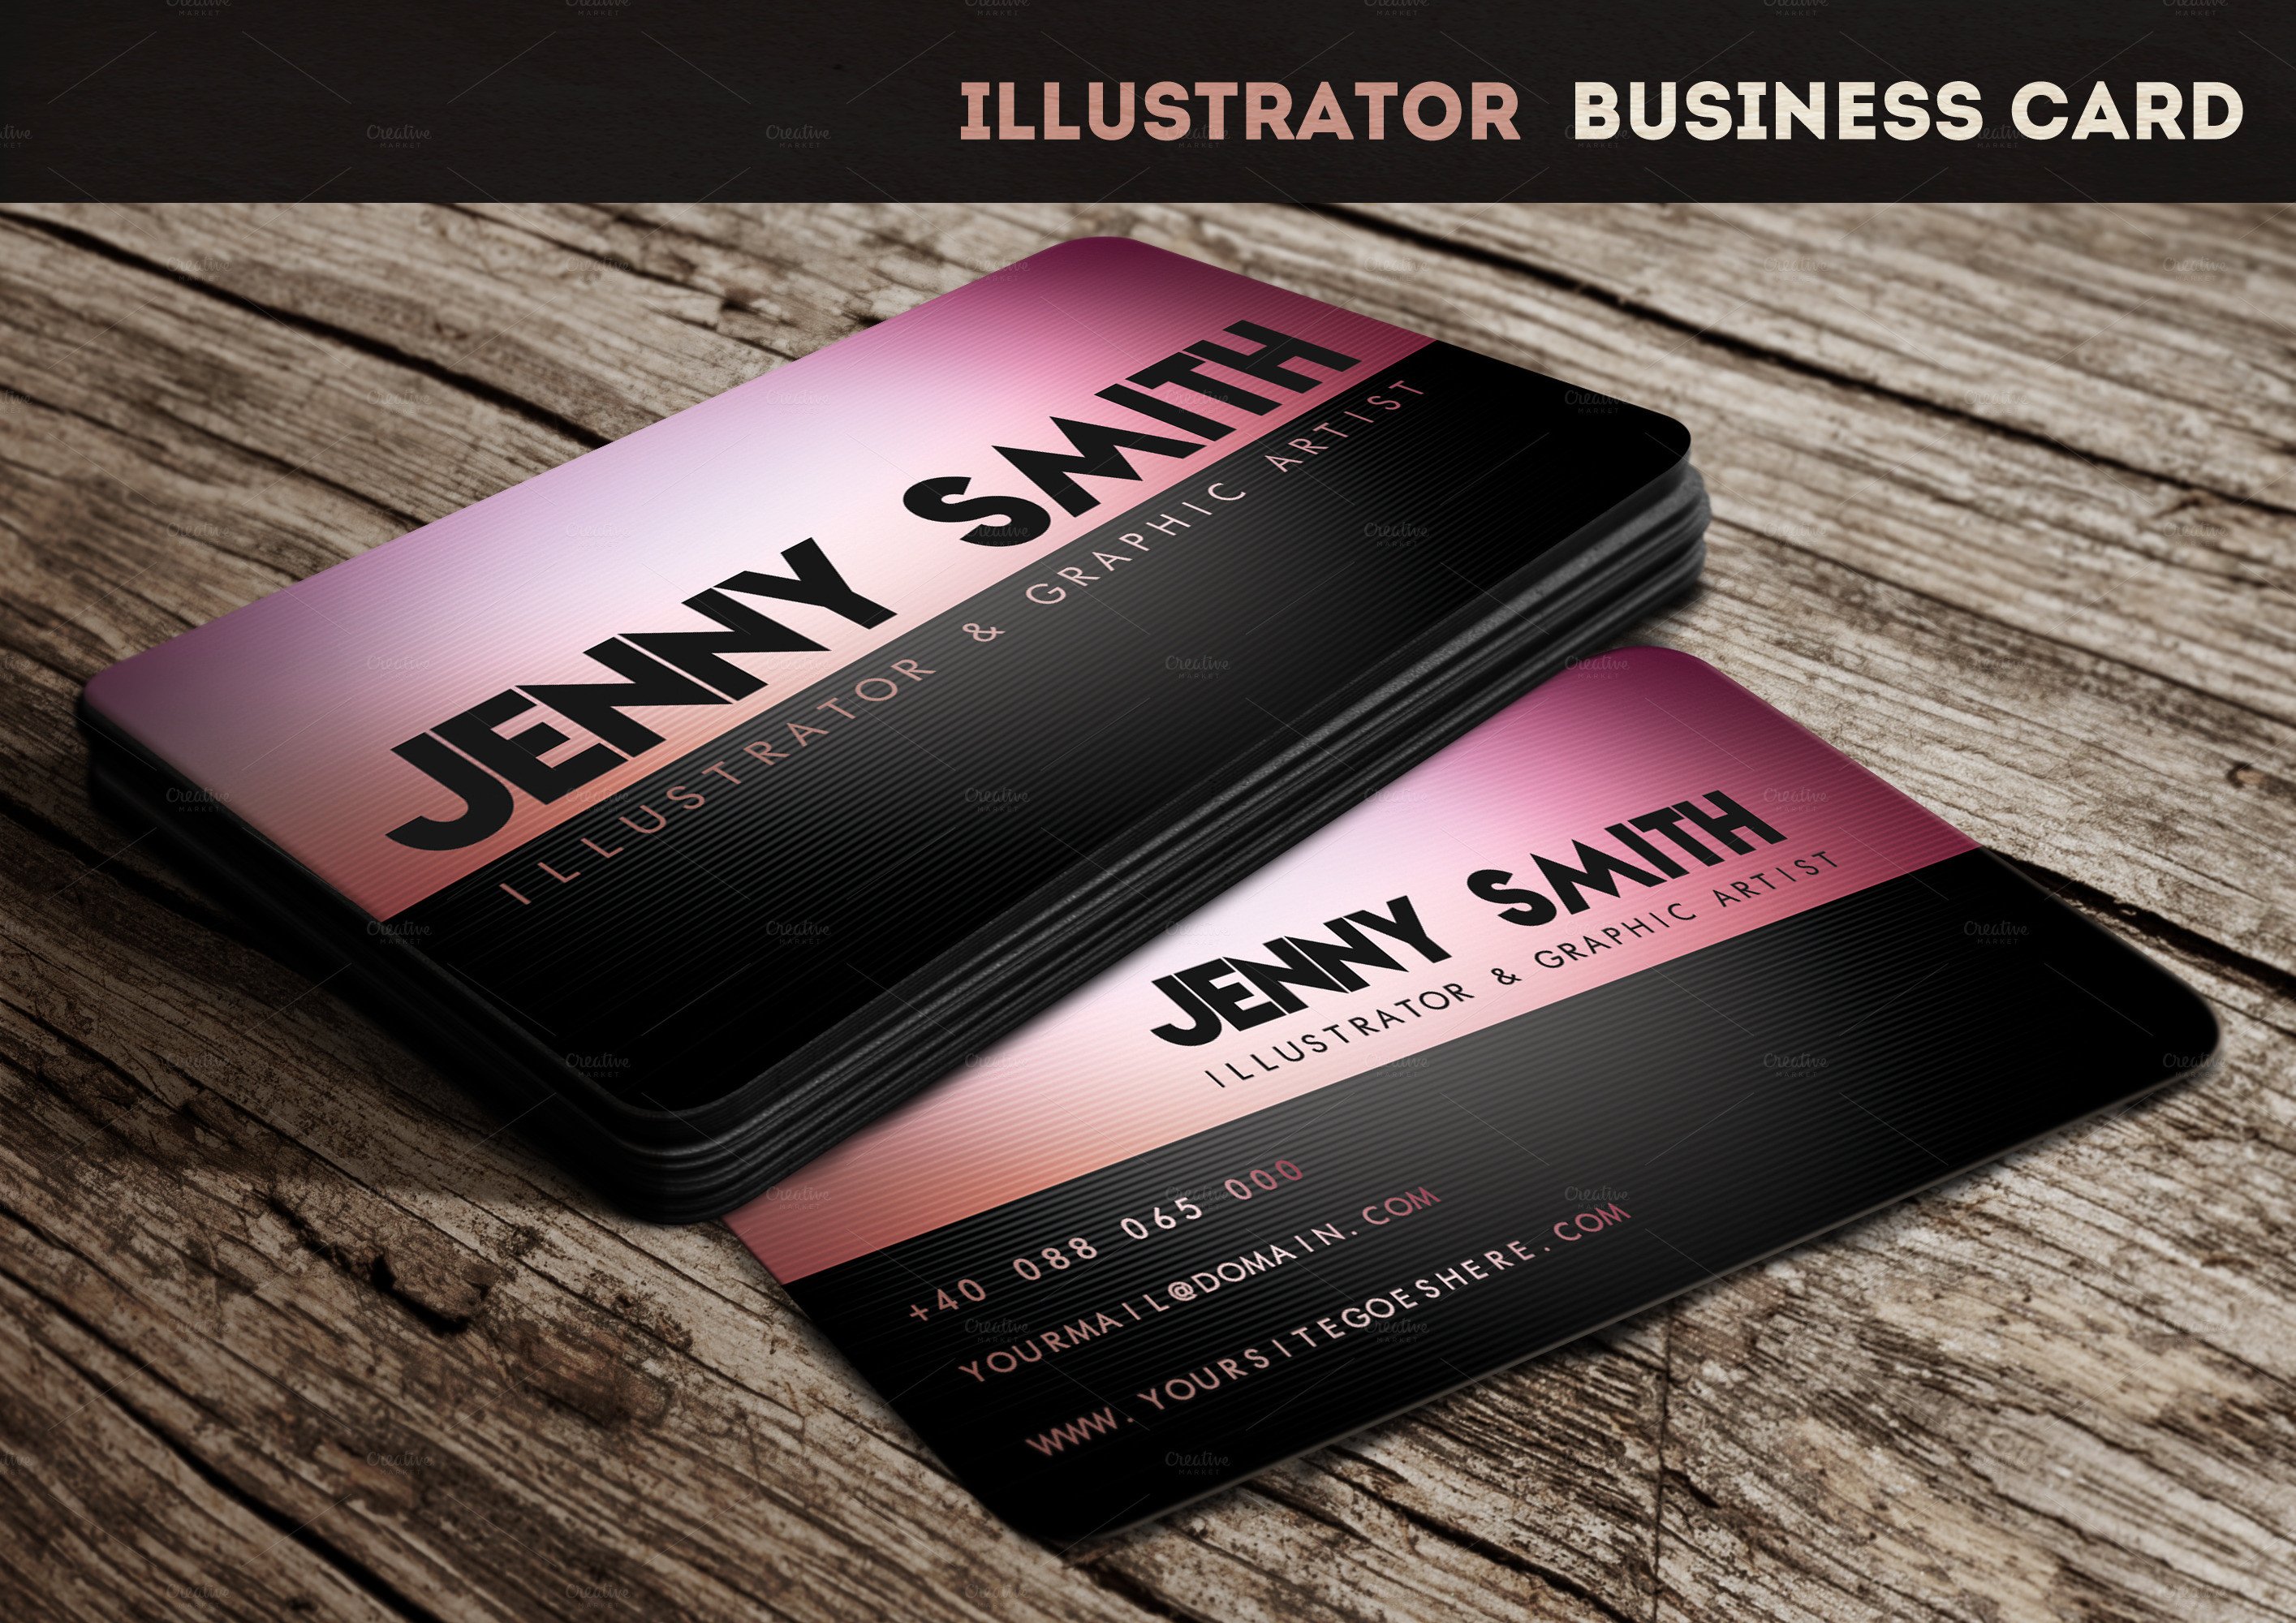 Illustrator Business Card Business Card Templates on